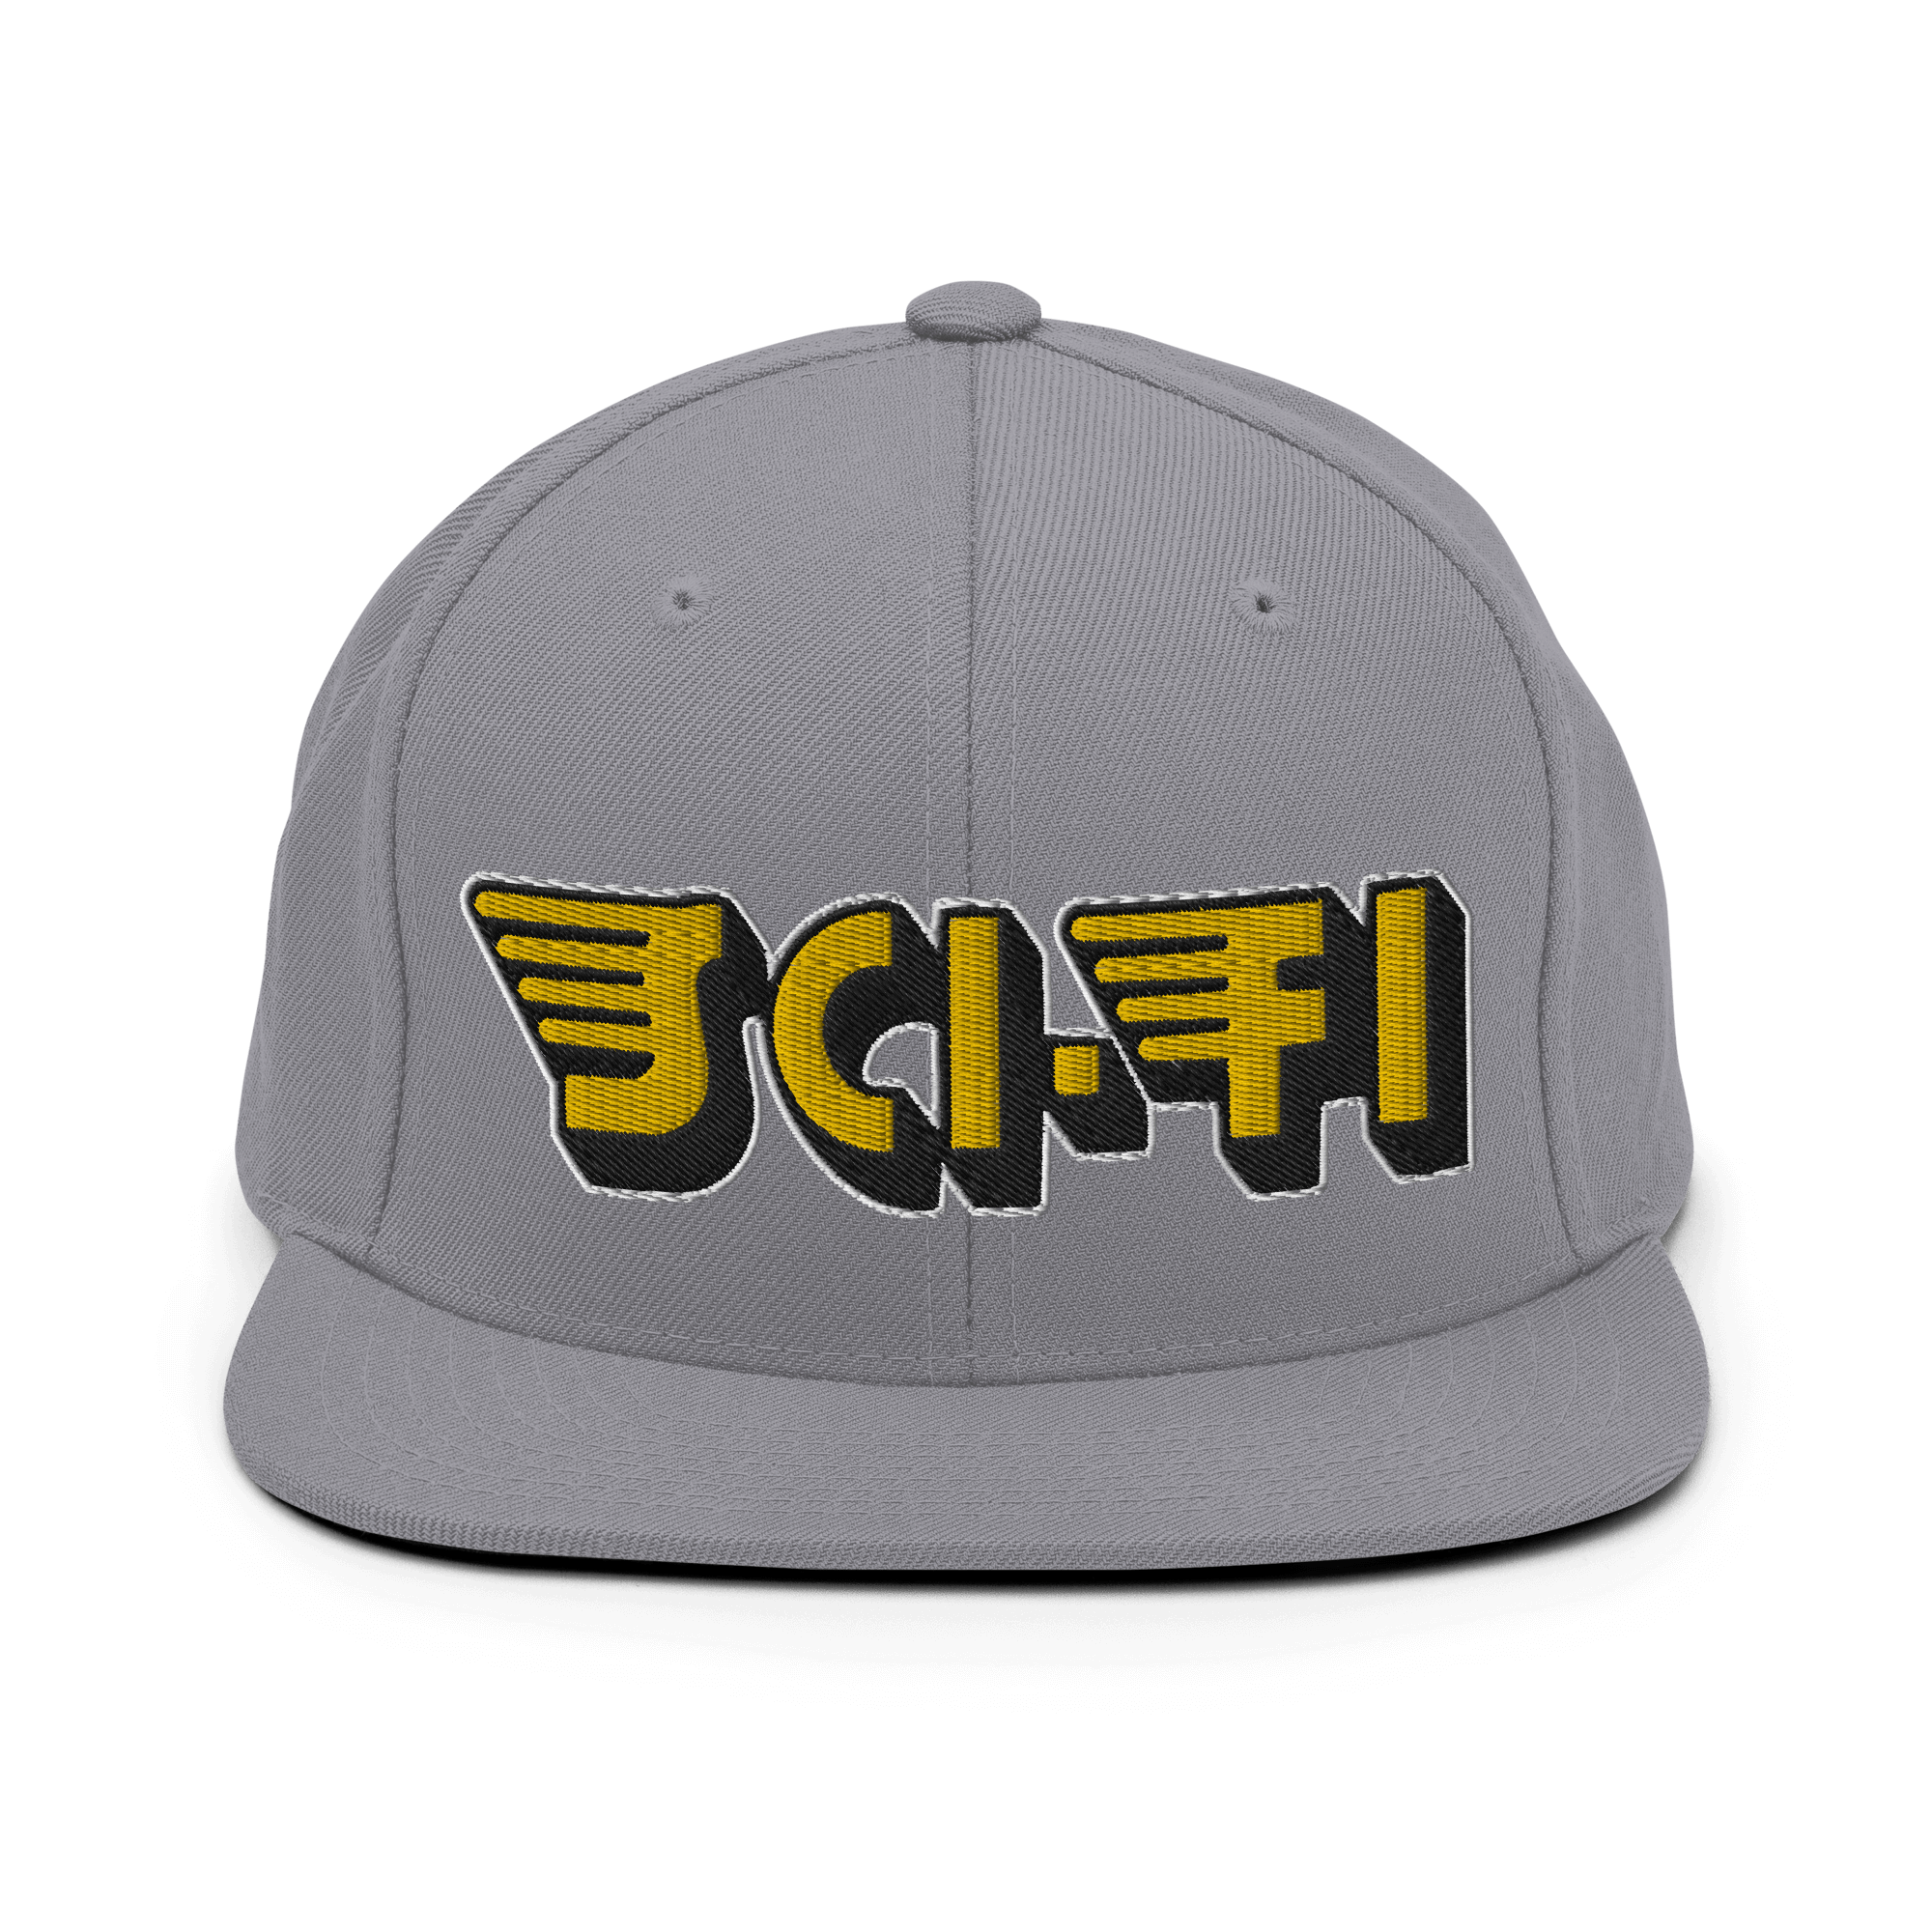 Sci-Fi Doctrine Snapback CapSci-Fi Doctrine Snapback Cap. This hat is structured with a classic fit, flat brim, and full buckram. The adjustable snap closure makes it a comfortable, one-size-fits-most hat. This product is made especially for you as soon a